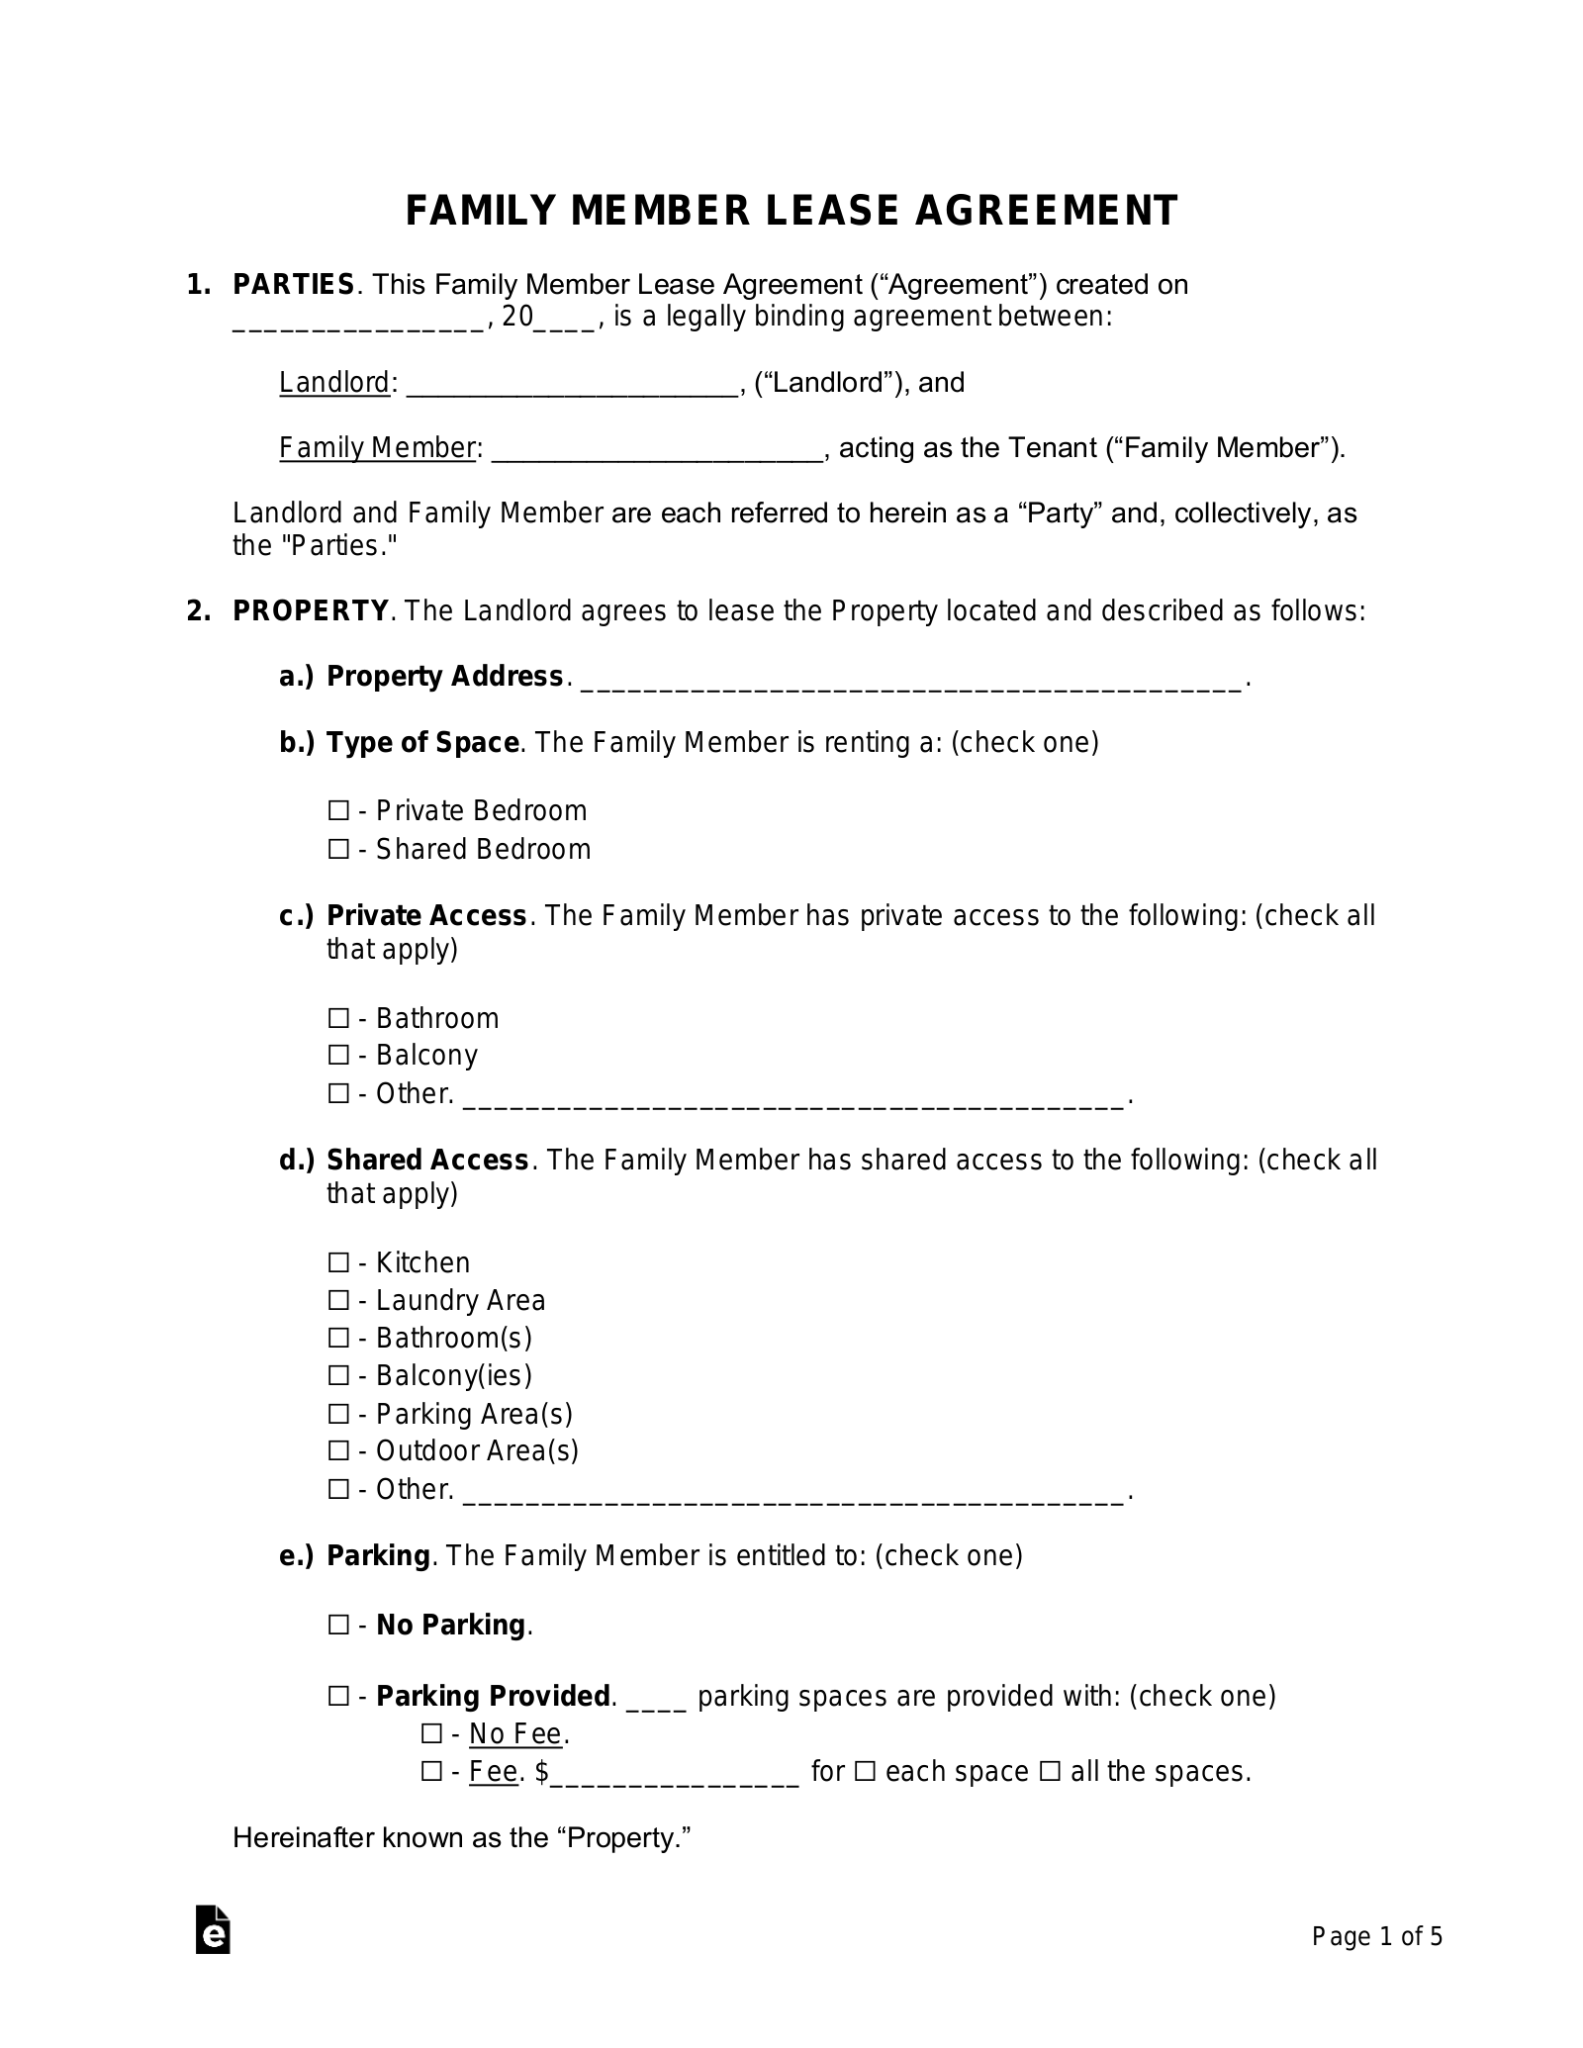 free-family-member-lease-agreement-template-pdf-word-eforms